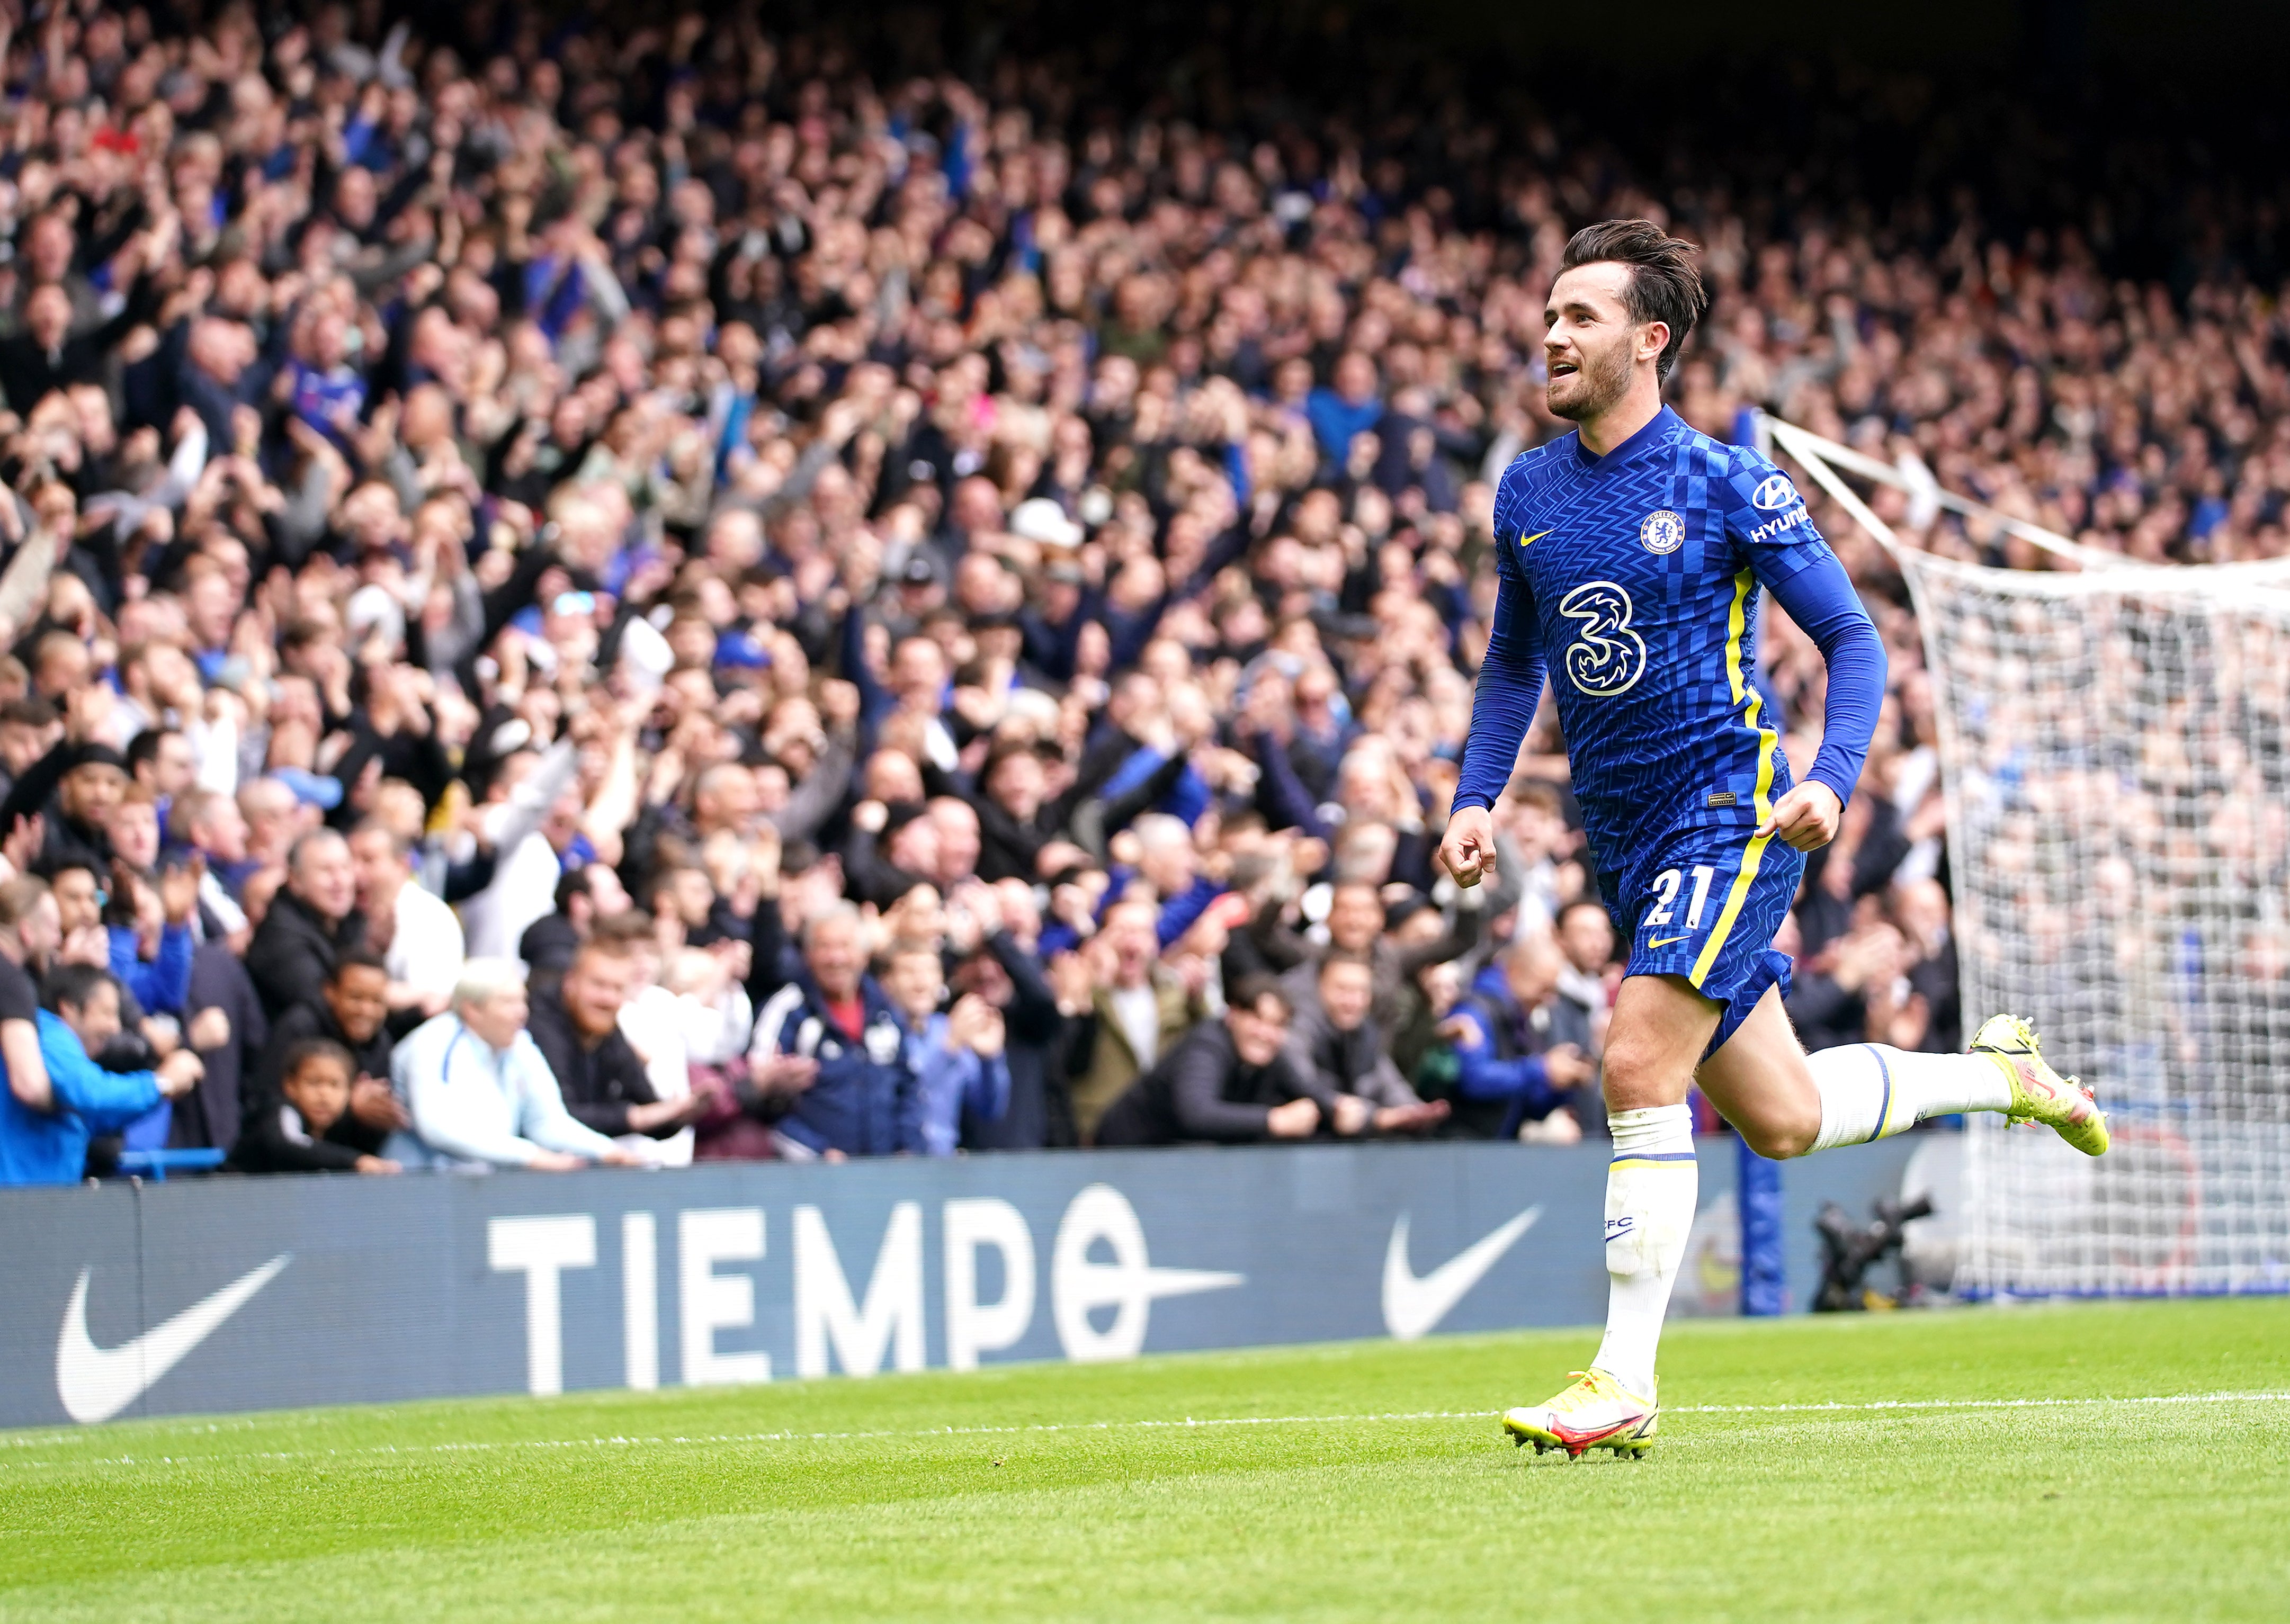 Chelsea’s Ben Chilwell has scored three Premier League goals this term (Tess Derry/PA)